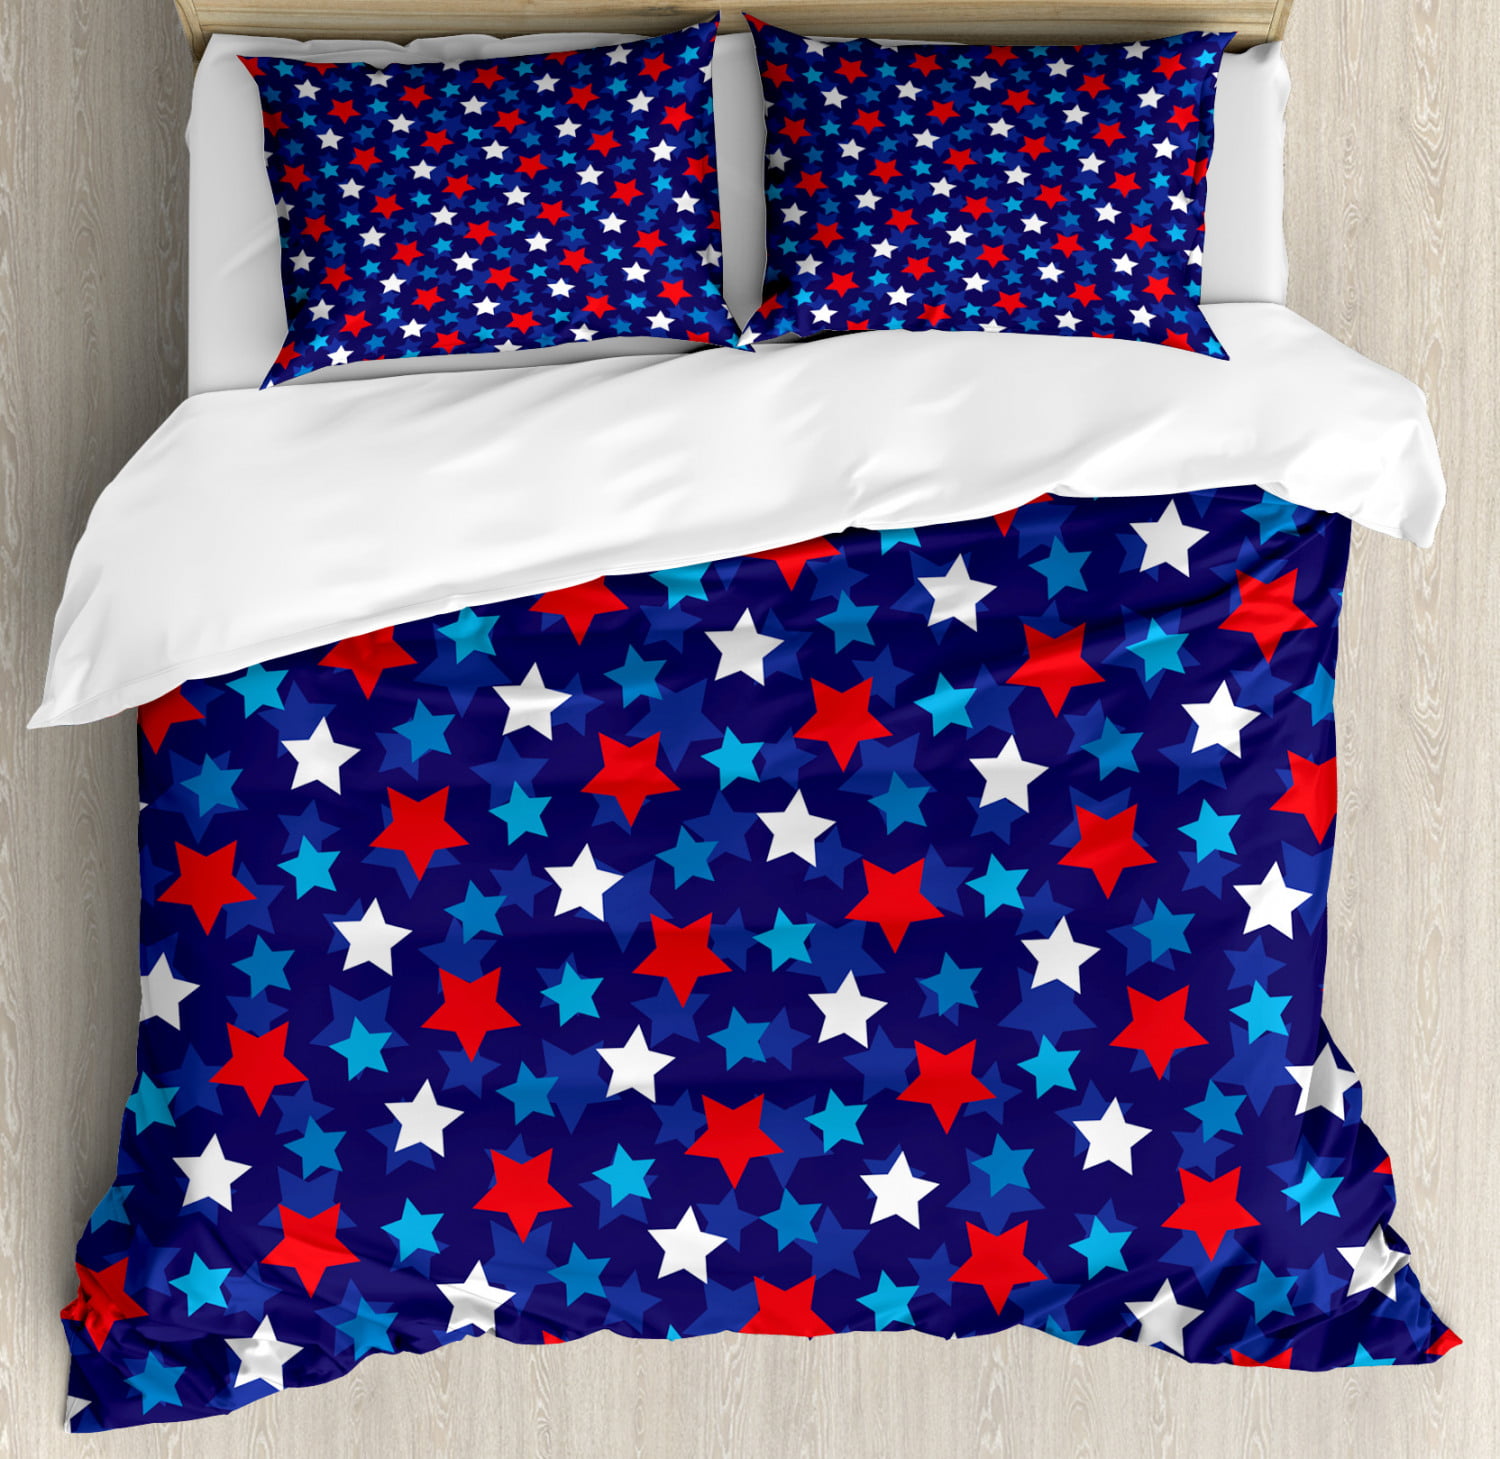 Navy Blue Duvet Cover Set King Size, Red White And Blue Bed Sheets